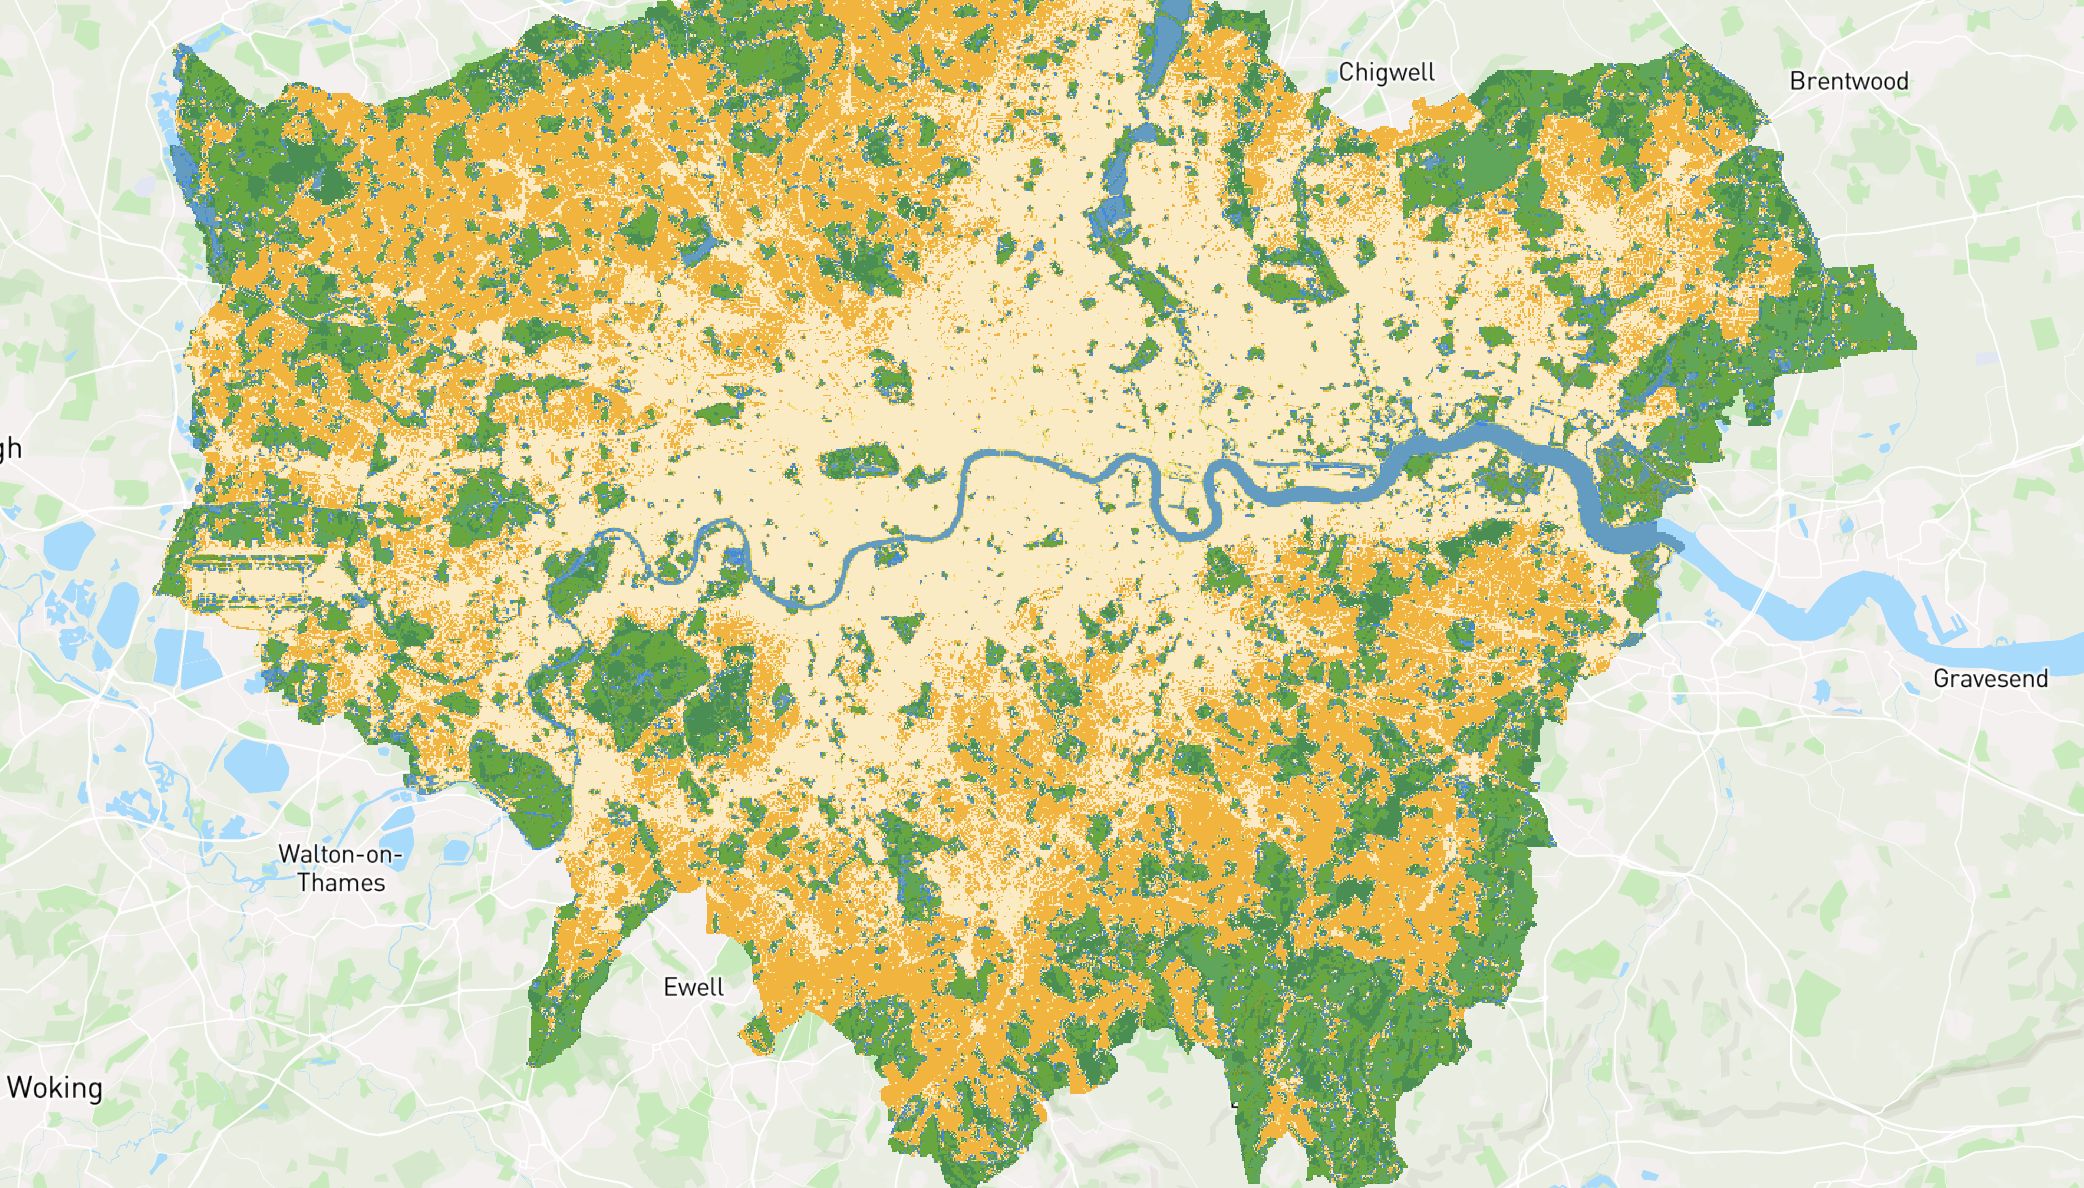 Landcover map